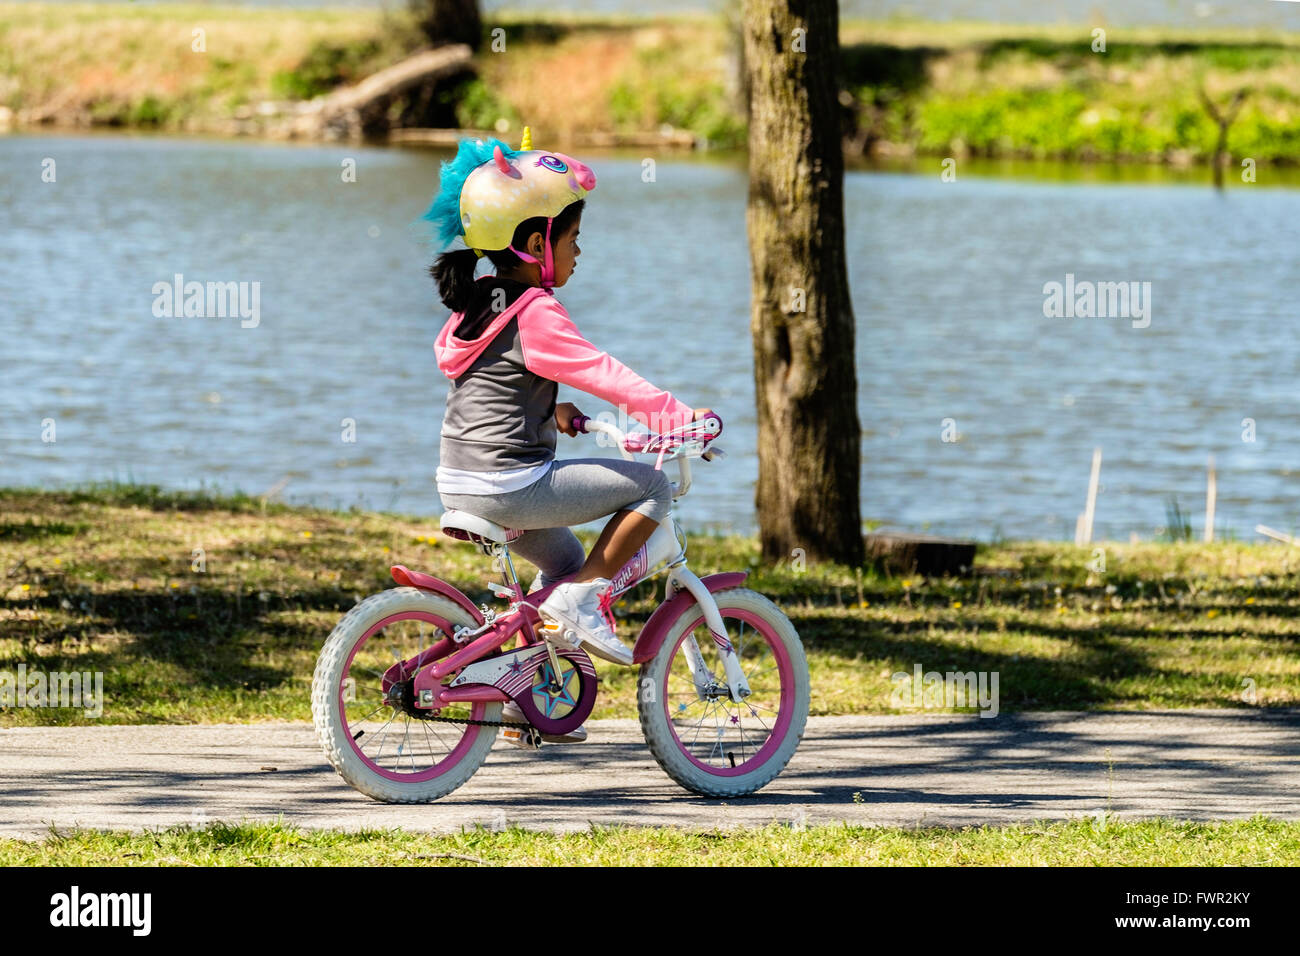 A young Hispanic girl with a unicorn helmet rides her bicycle on the trails at Overholser lake, Oklahoma City, Oklahoma, USA. Stock Photo